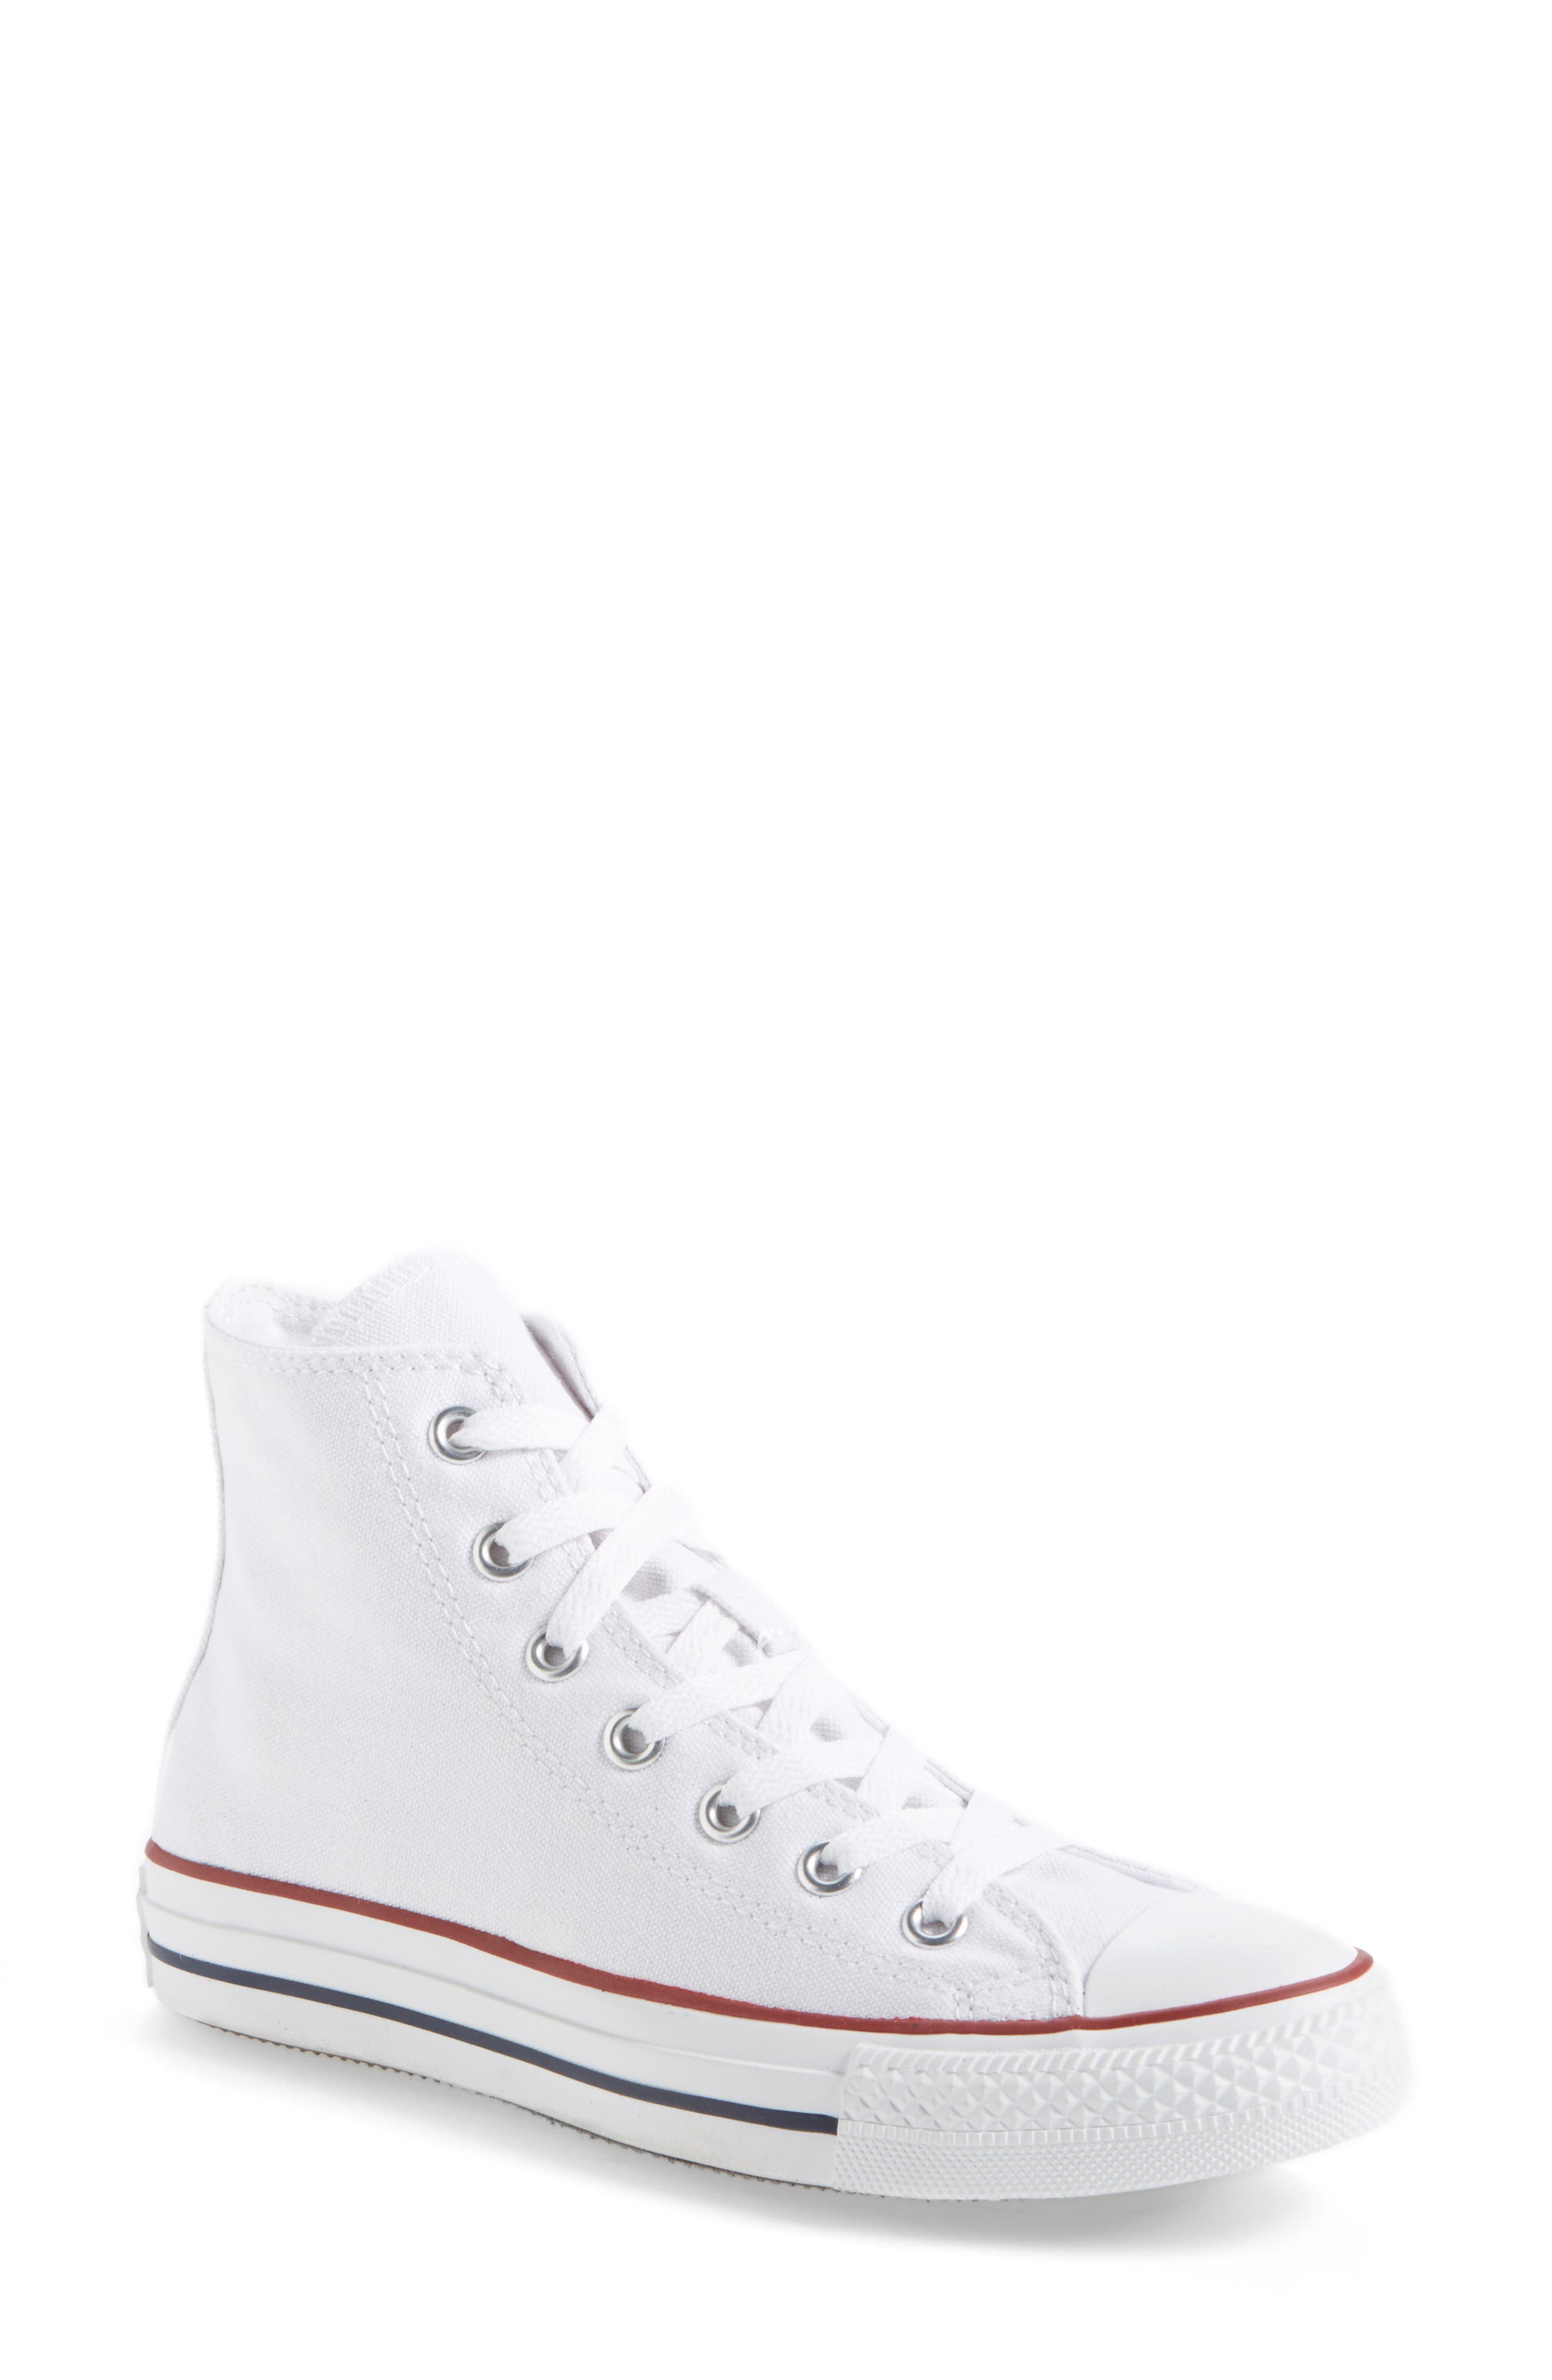 converse womens high top sneakers